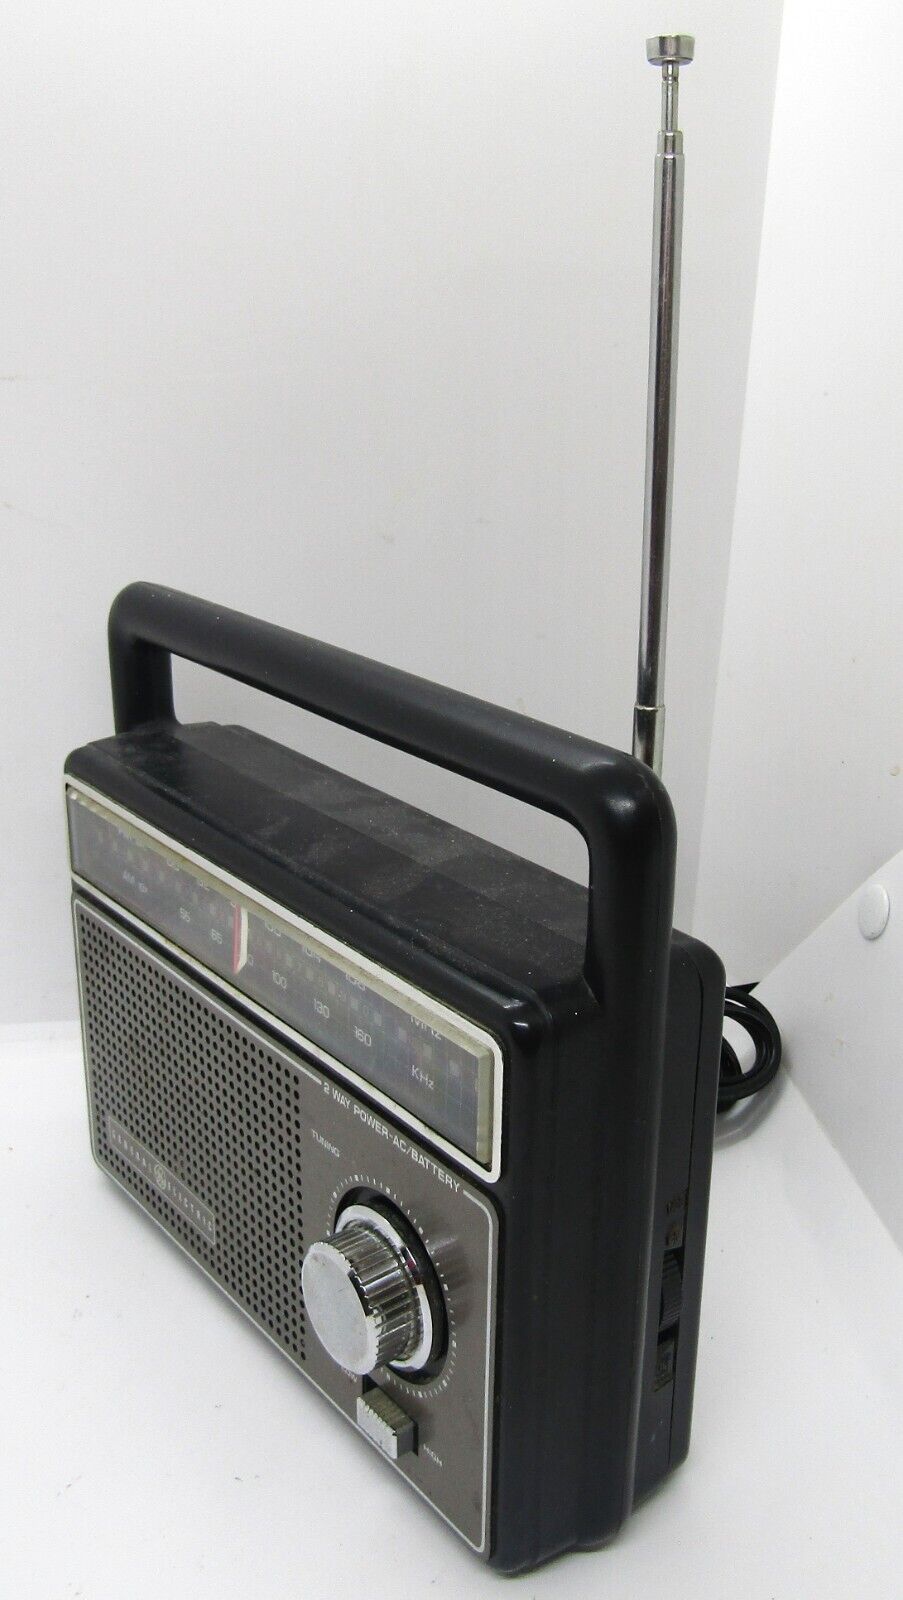 Vintage General Electric GE Portable AM/FM Radio Model 7-2660C Battery Or Corded